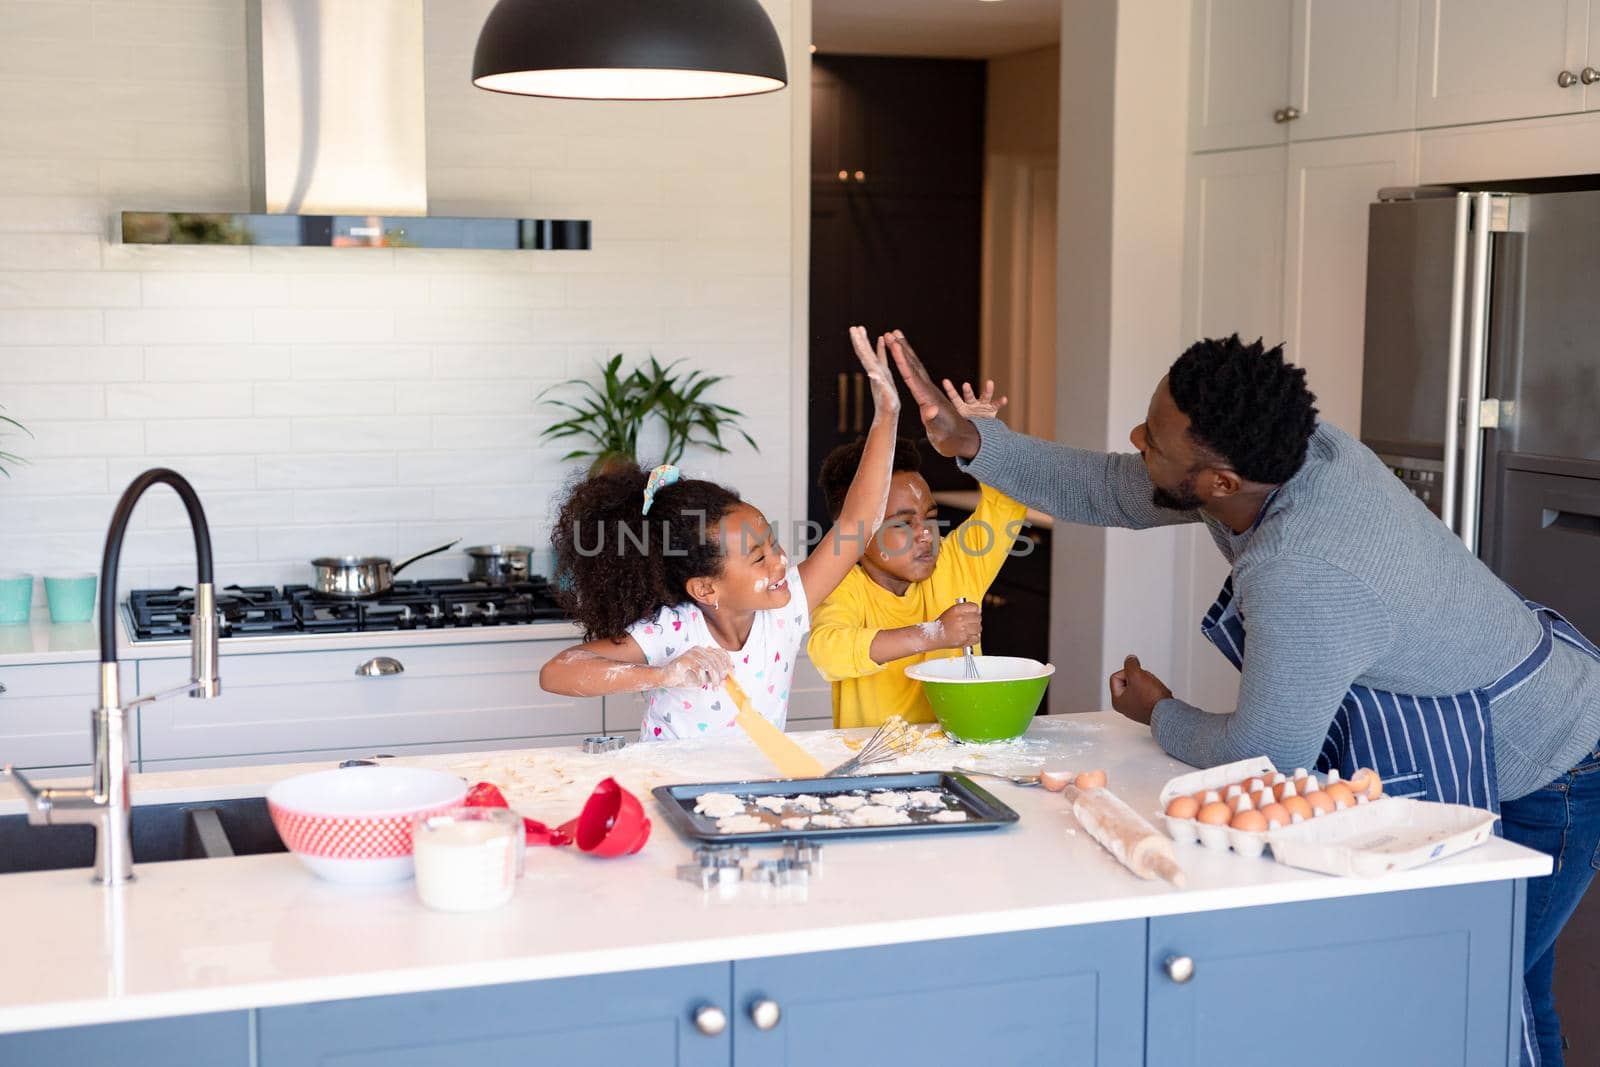 Happy african american father and siblings baking together in kitchen, giving high five. baking and cooking, family time, having fun together at home.